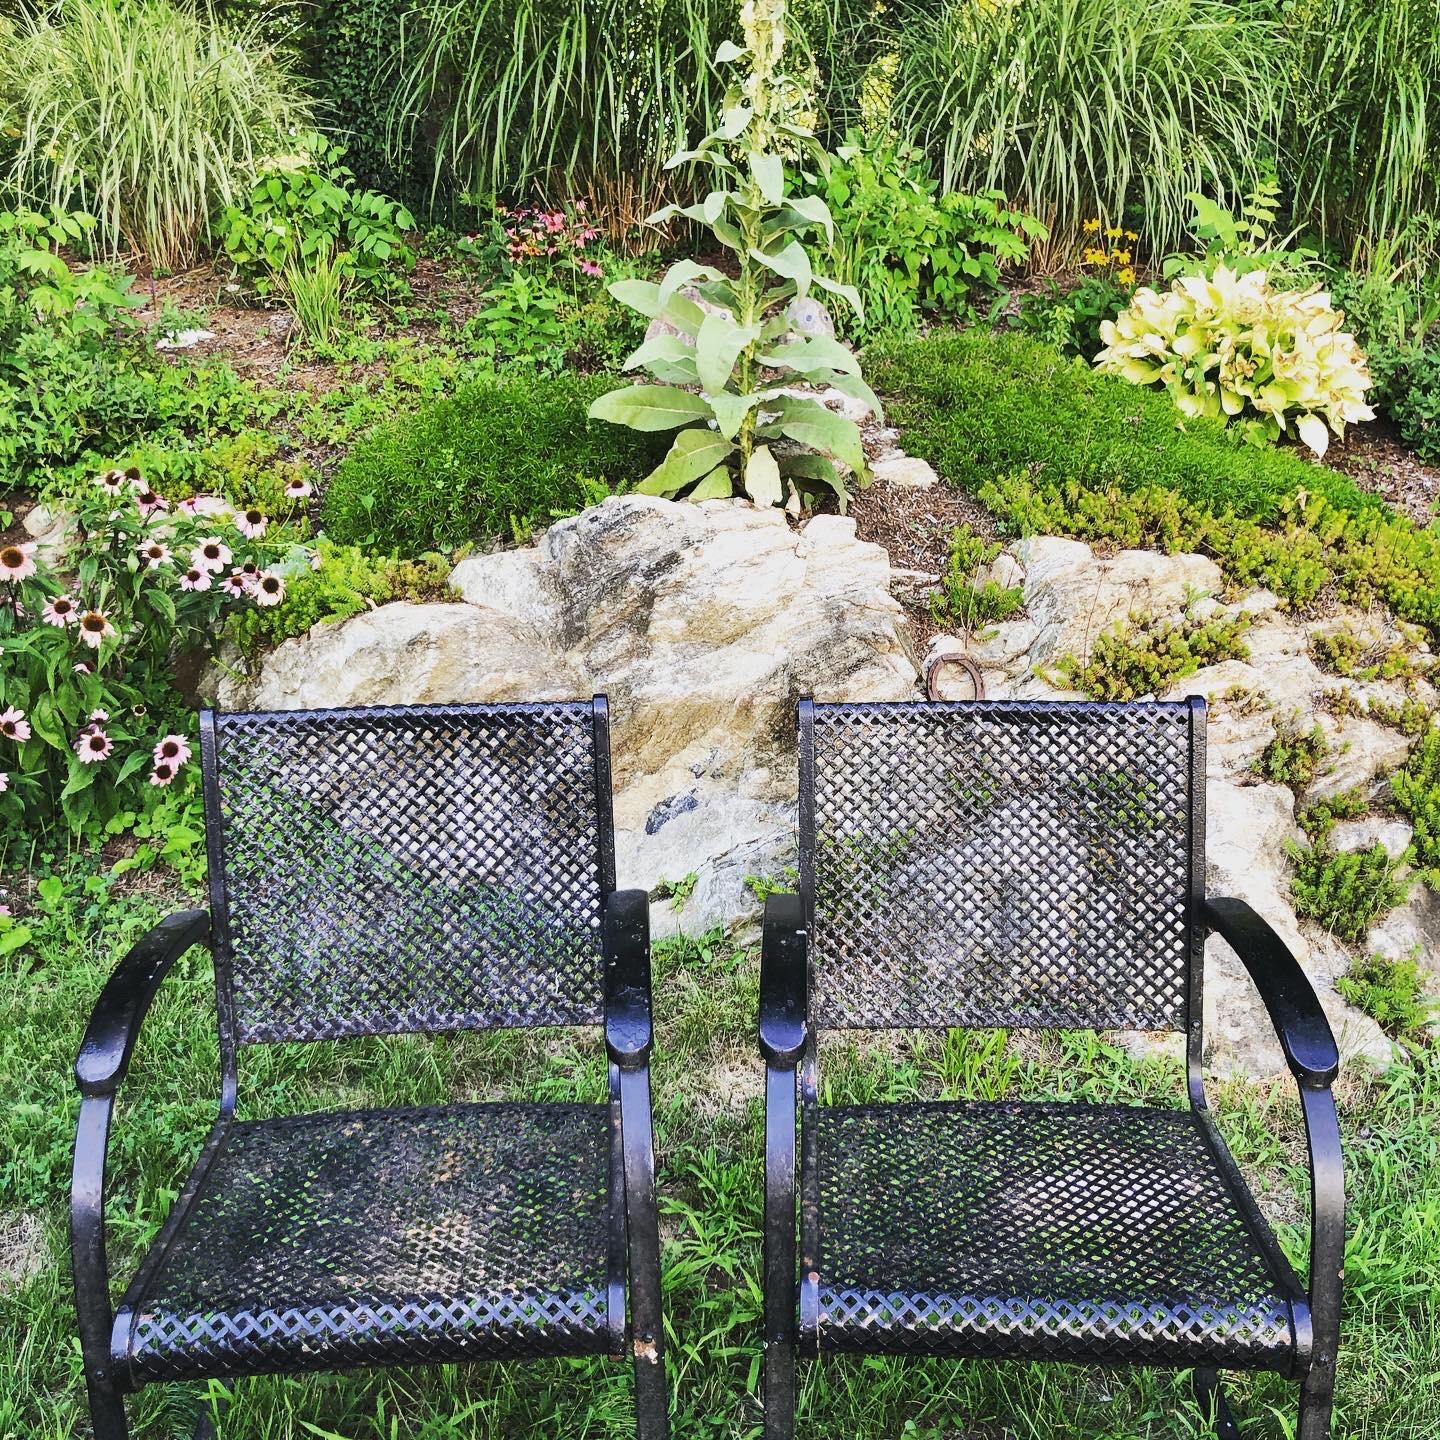 Pair of heavy iron cantilever garden chairs from the 1930s. Most likely produced by Howell Cane. These are the real deal. Heavy, solid construction. These will not blow over in a storm.
Perfect for a garden tableau or vignette.
The W.H. Howell